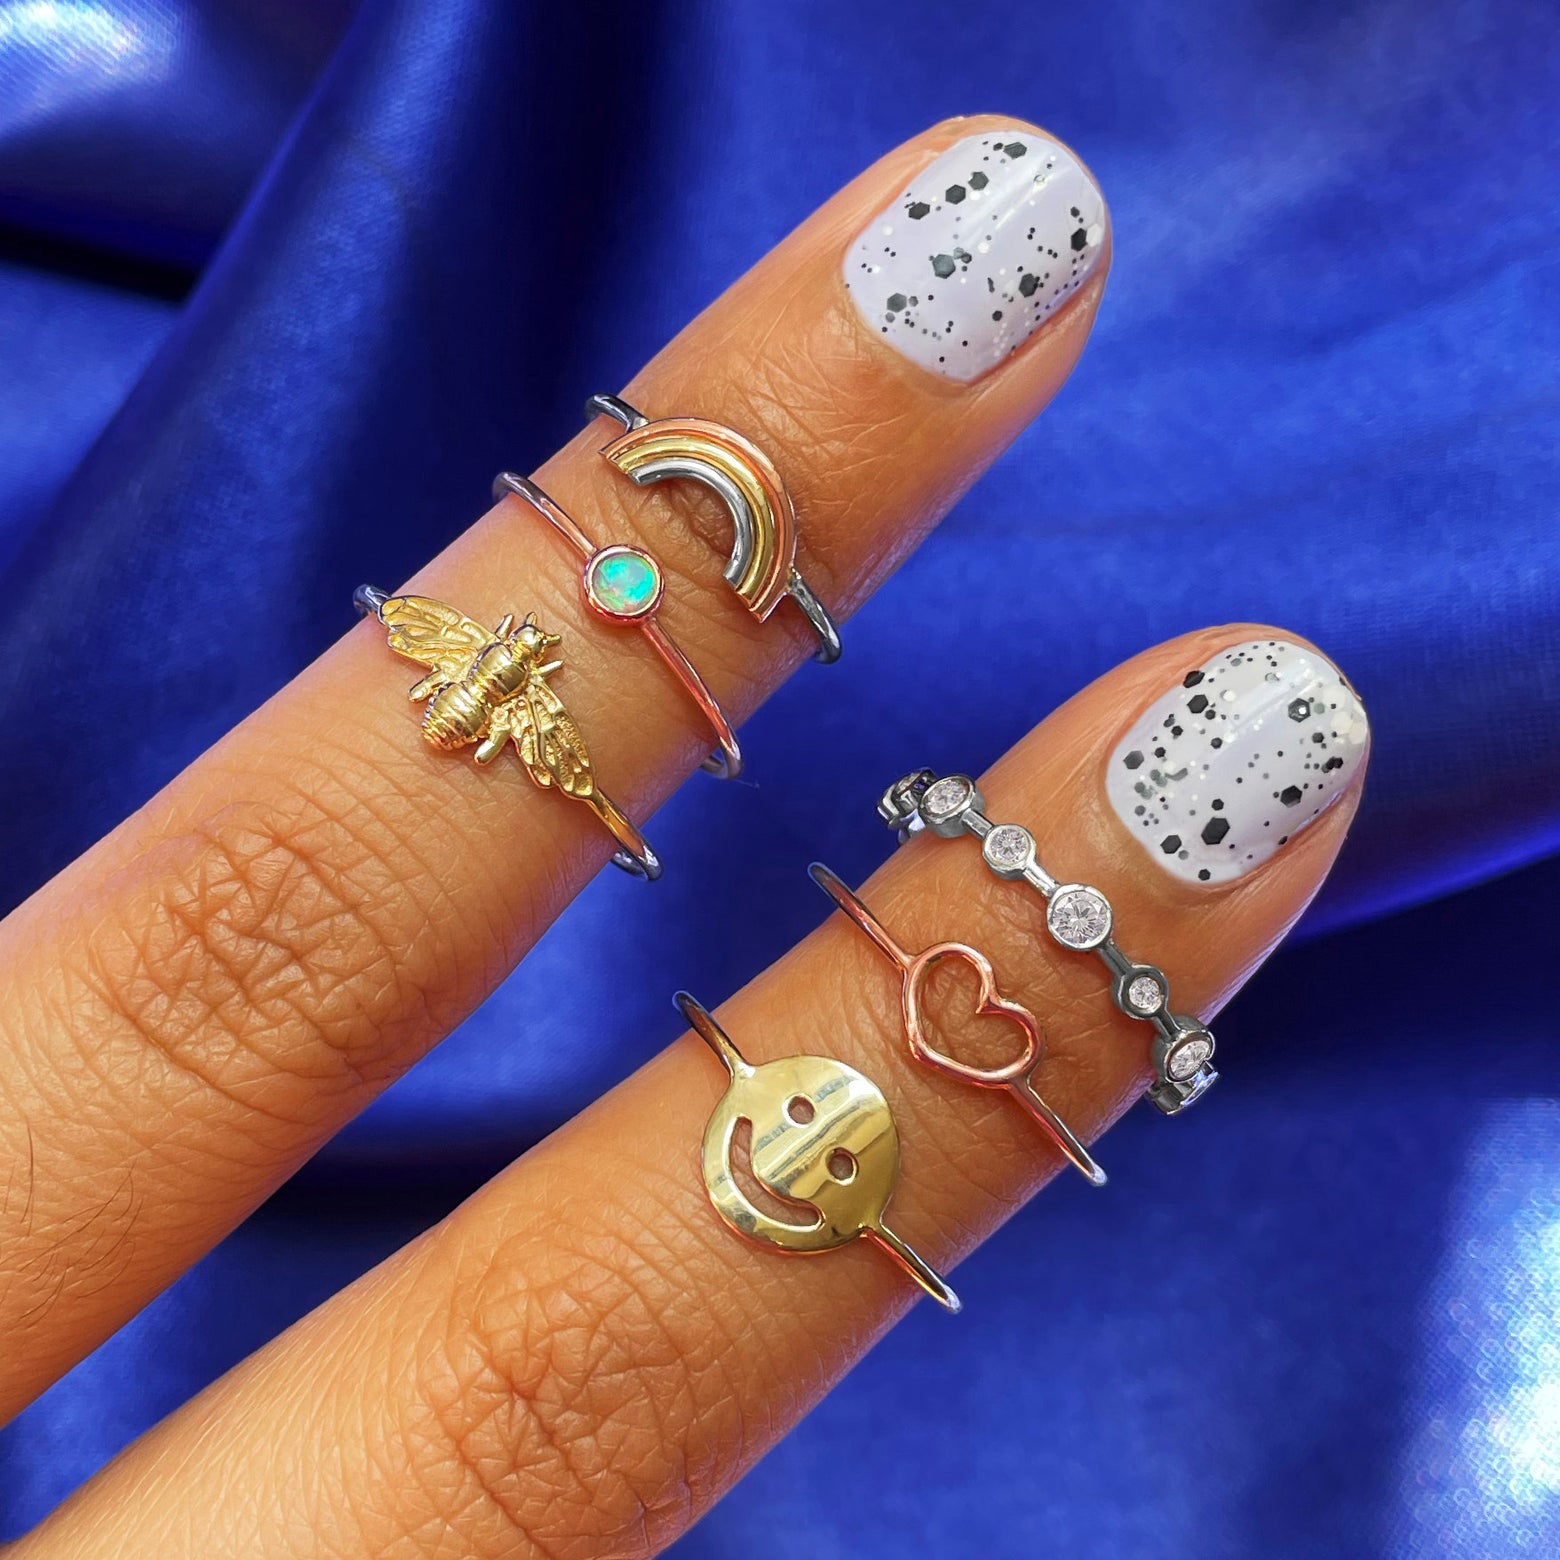 Two fingers with speckled nail polish wearing various Automic Gold rings including a rose gold Opal Ring